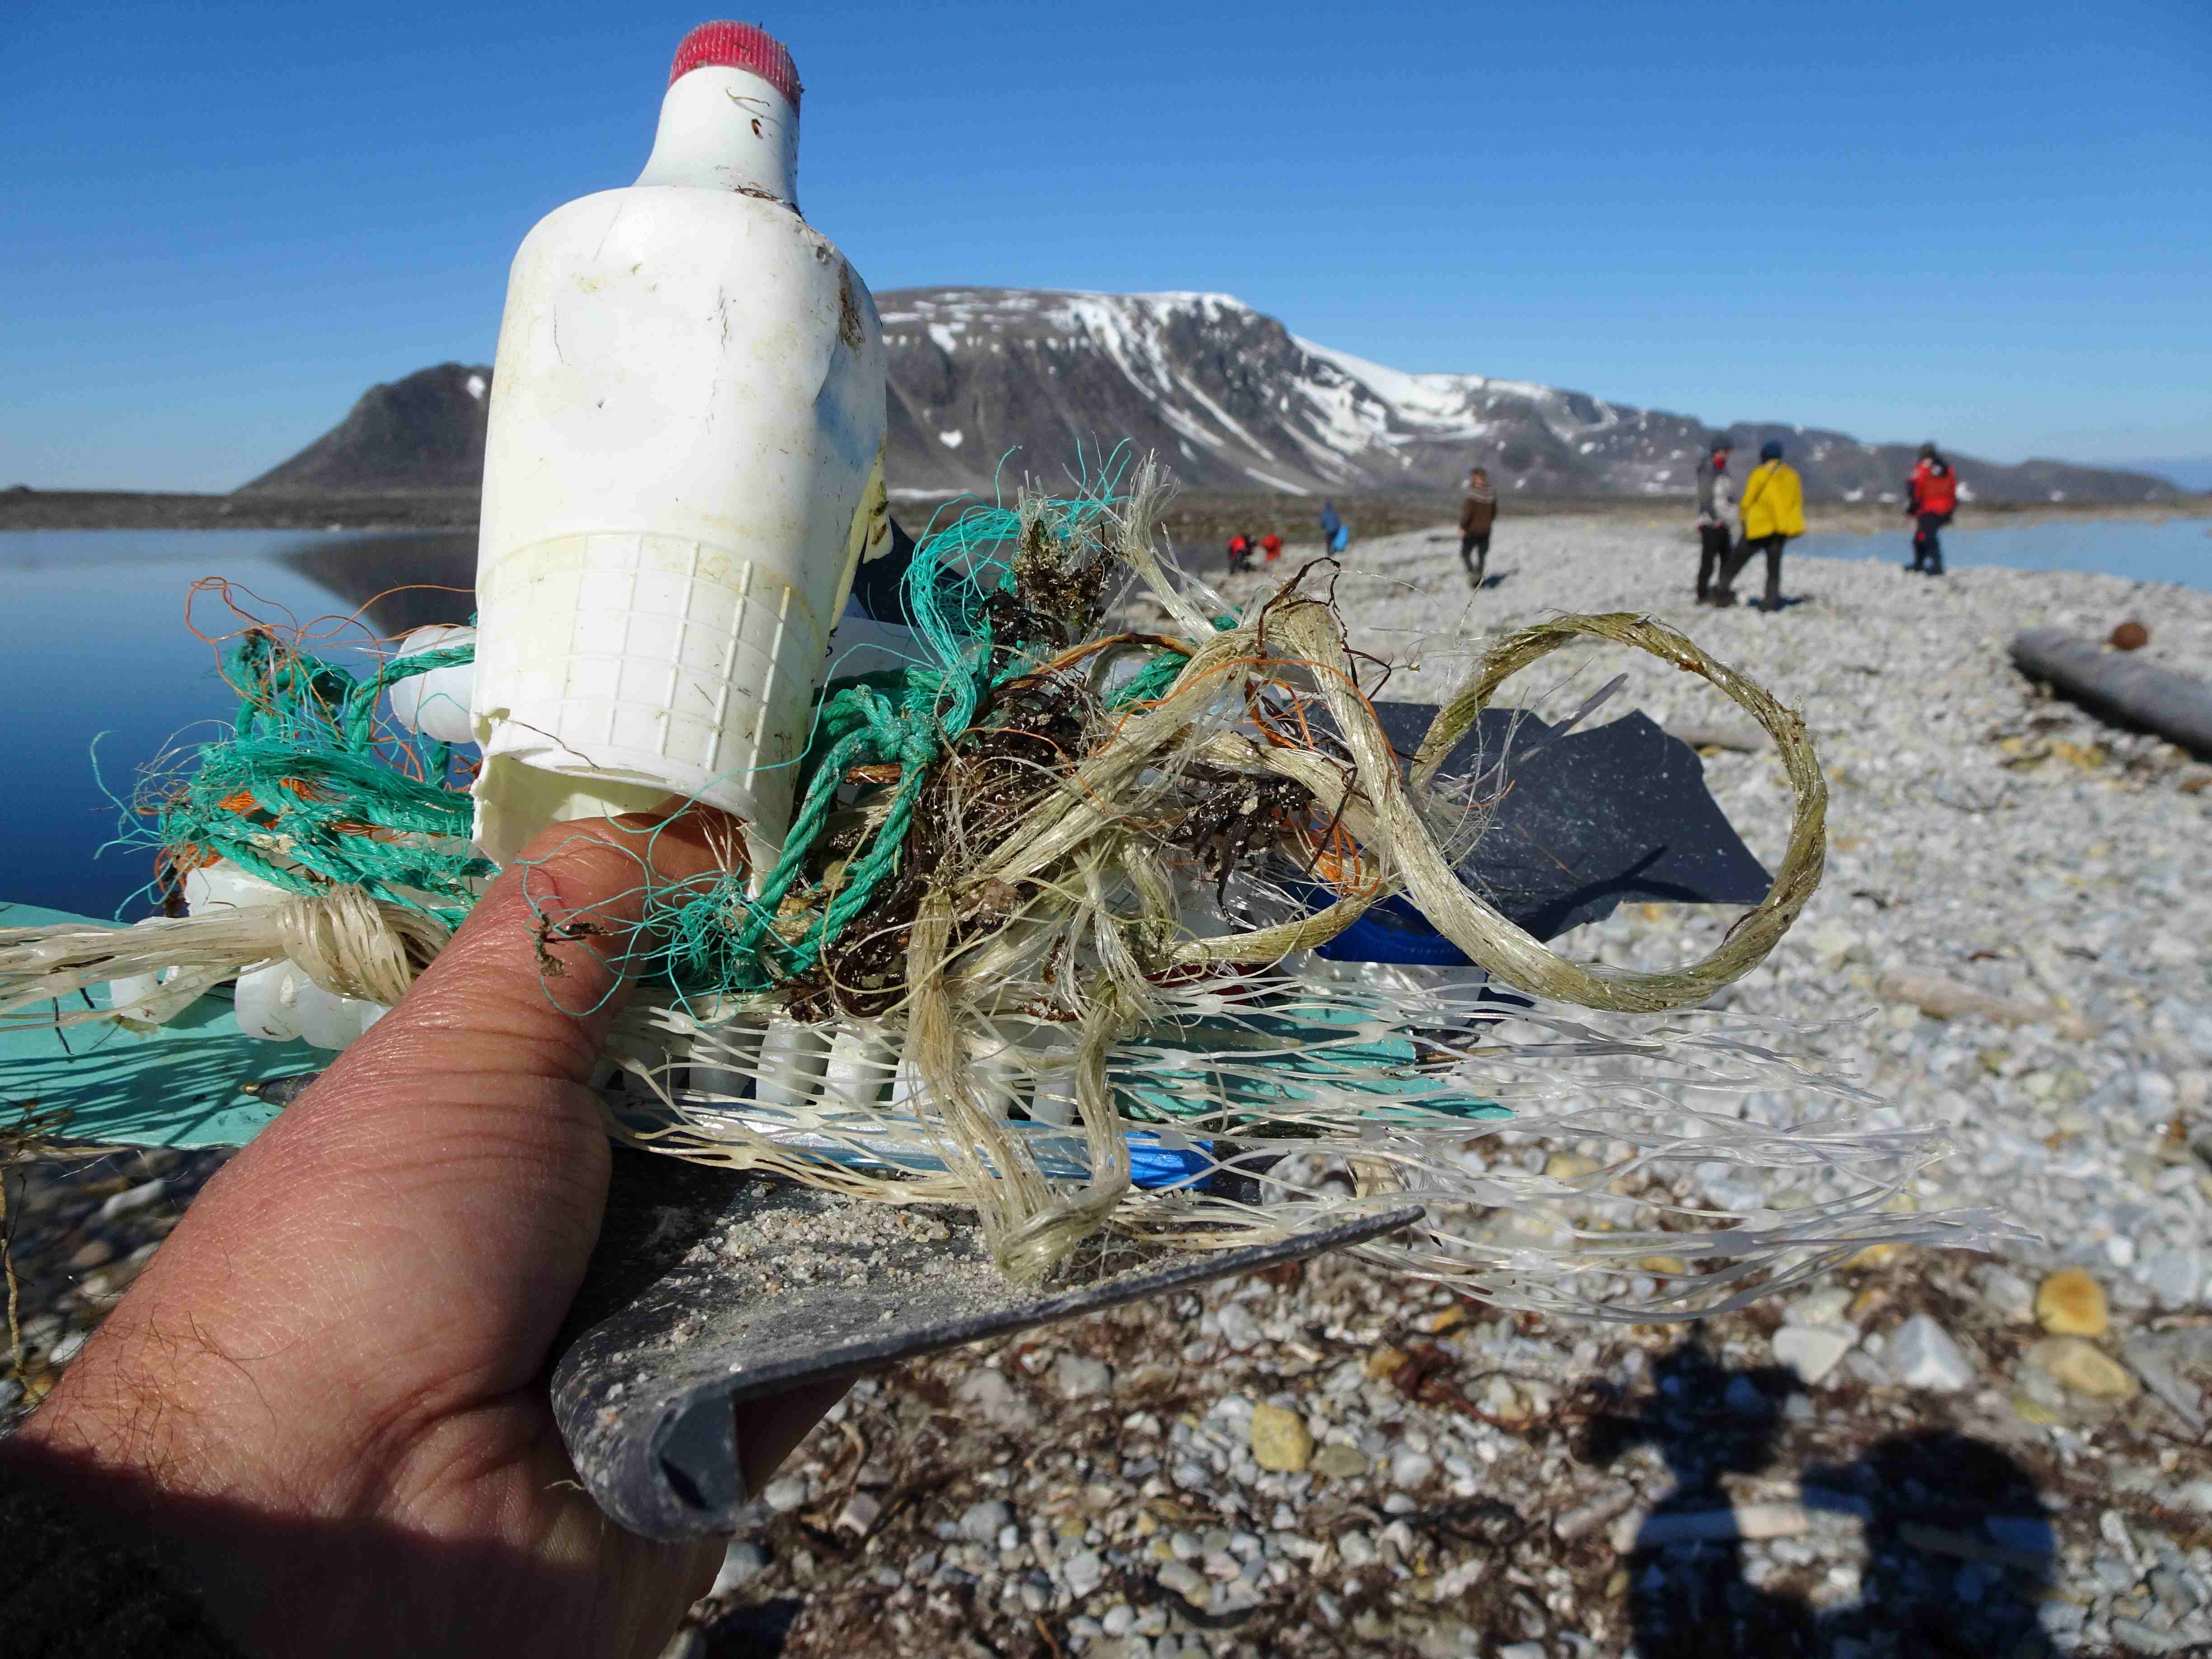 Up in the high Arctic at 78º North, Svalbard is not immune to plastic trash...